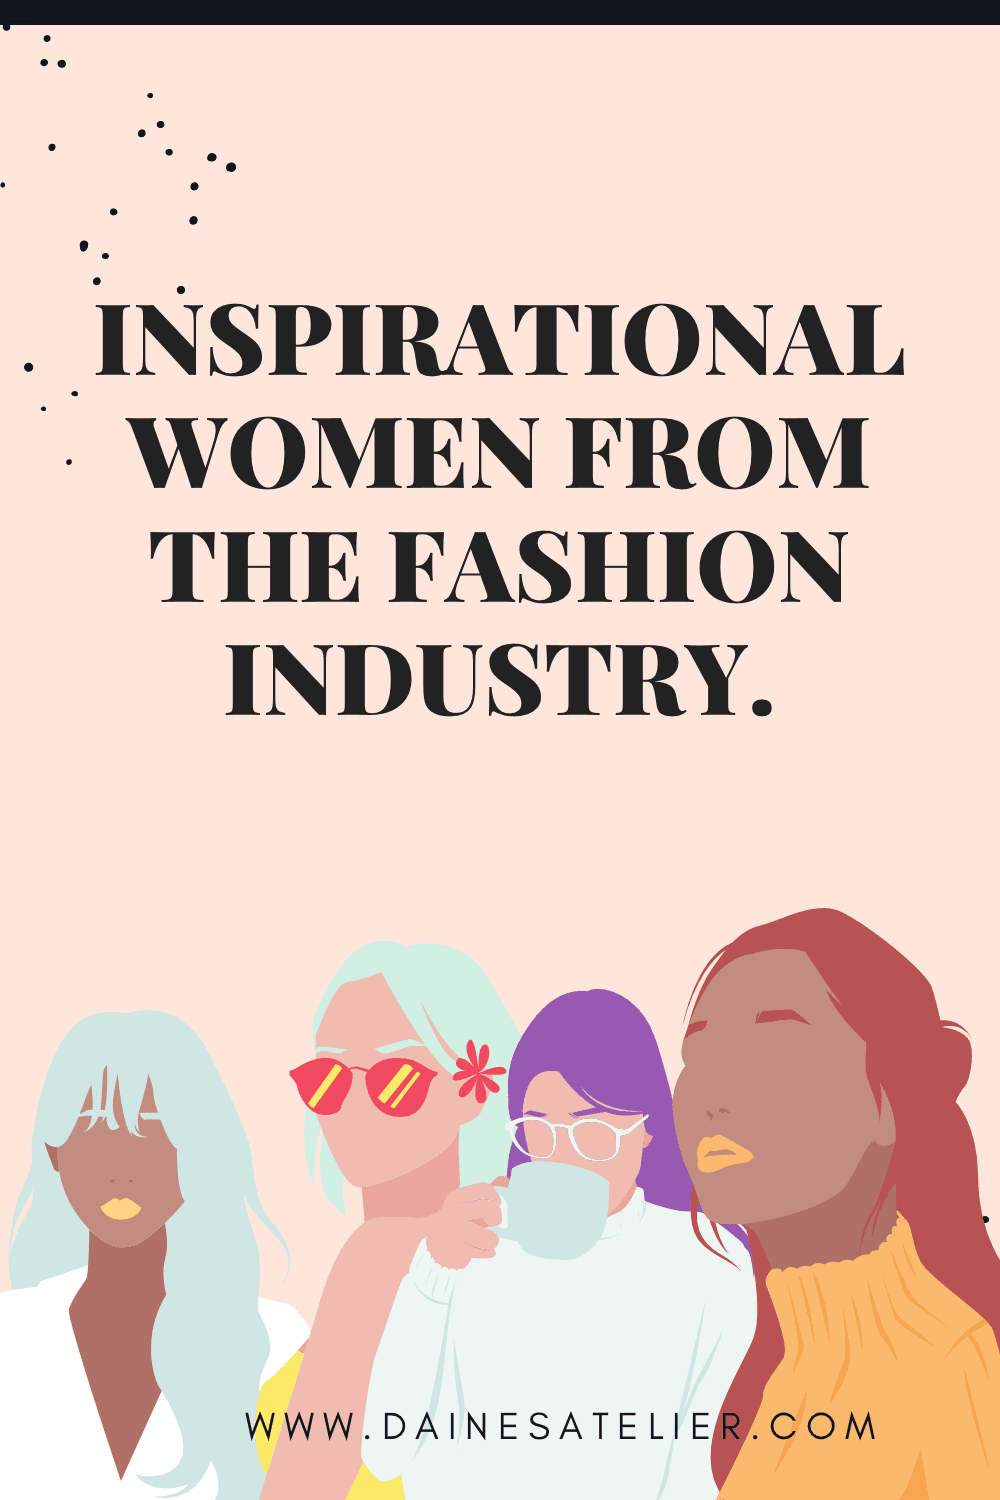 Inspirational women from the fashion industry Pinterest pin with woman illustrations